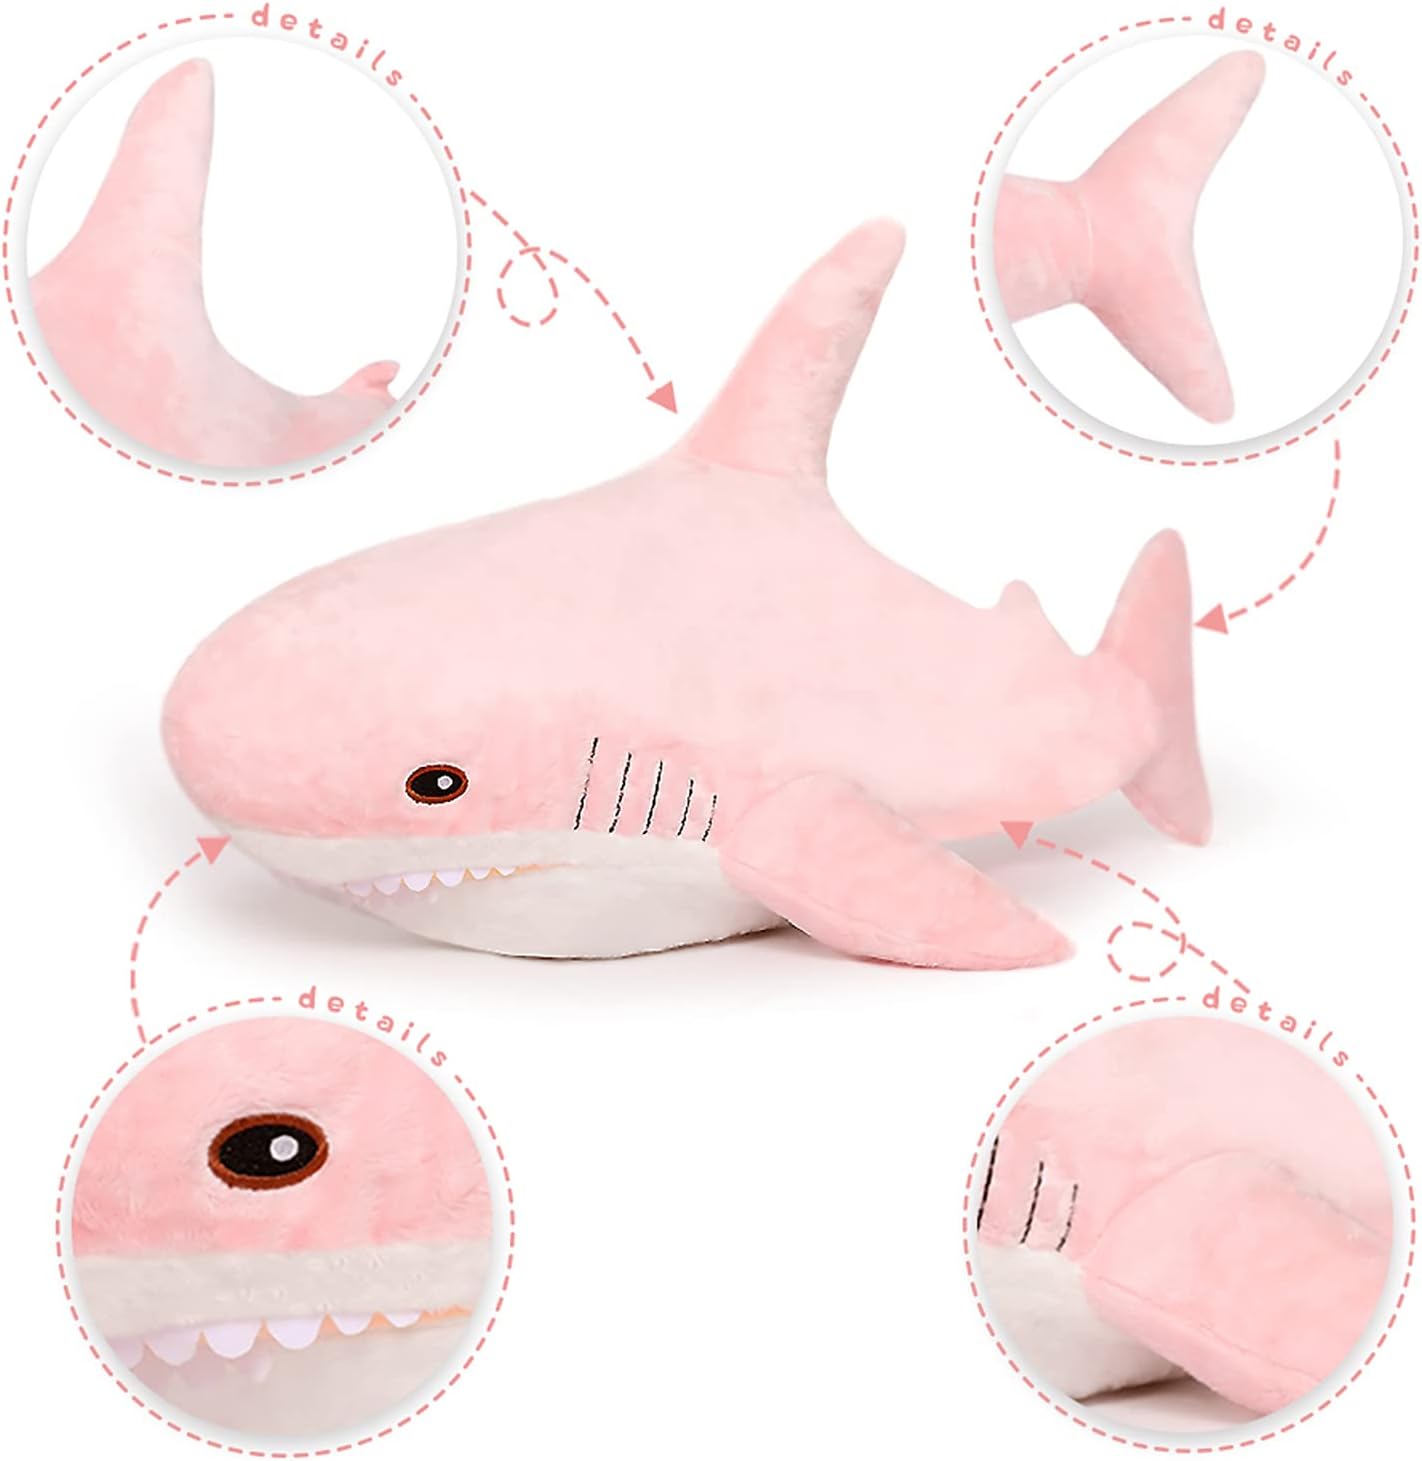 Giant Shark Plush Toy, Multicolor, 32/40 Inches